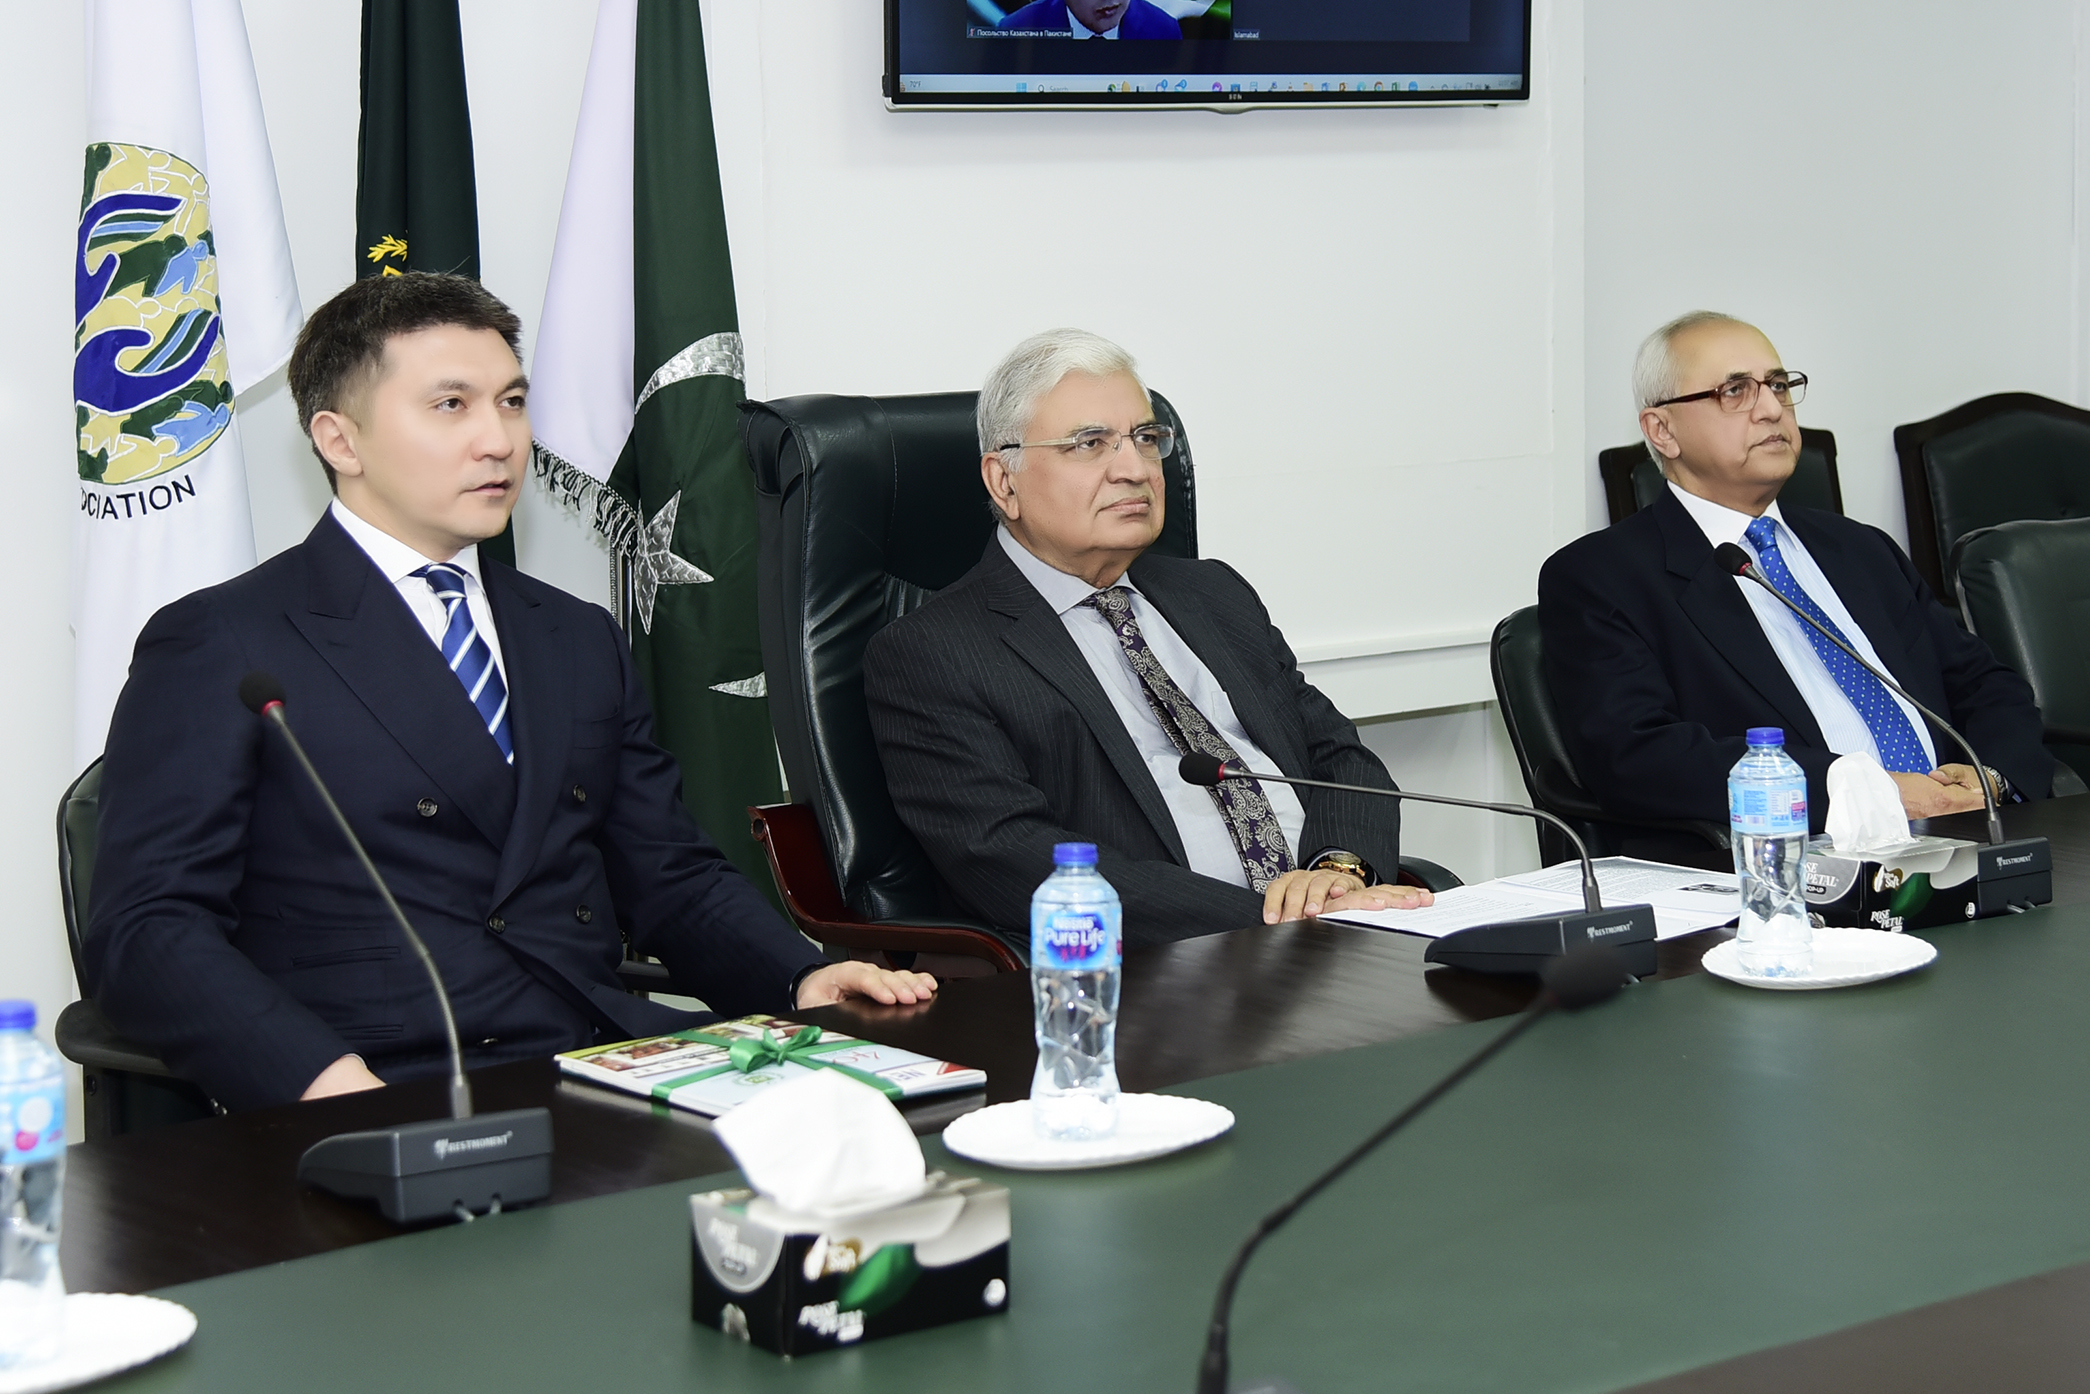 Online meeting between the Federal Ombudsman of Pakistan and Commissioner of Human Rights, Republic of Kazakhstan on March 2023.